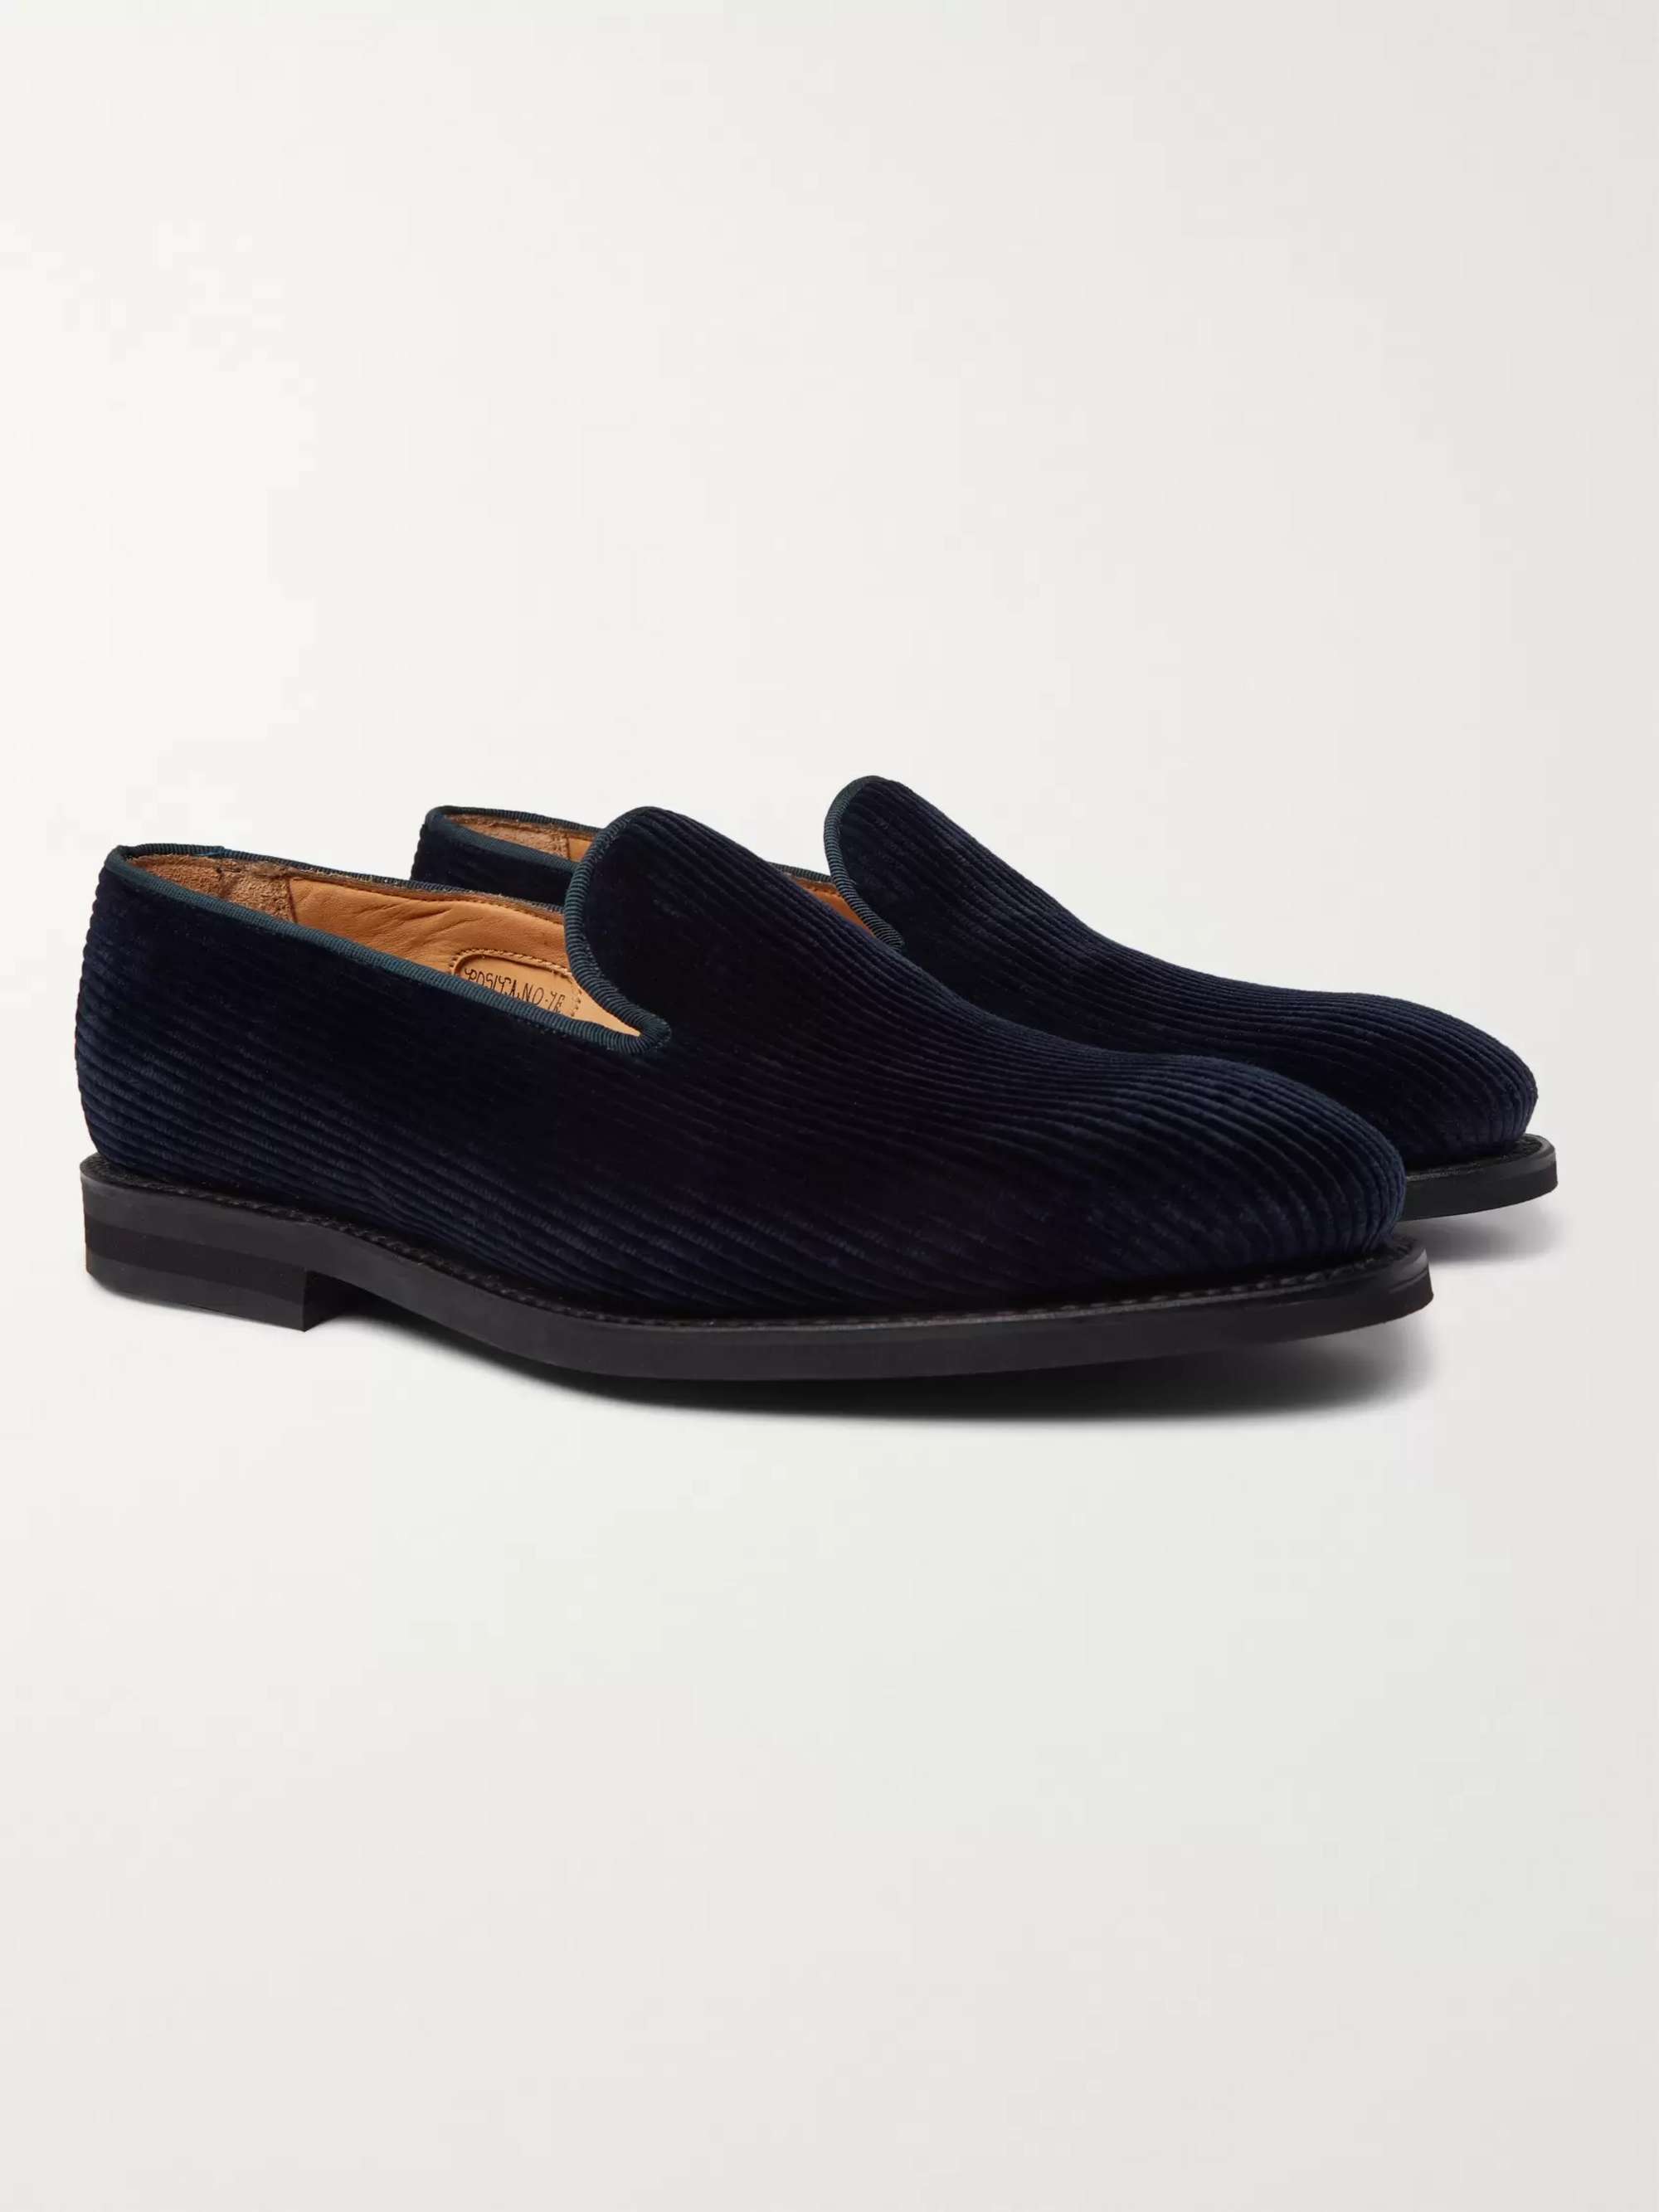 GEORGE CLEVERLEY Positano Waxed-Cotton Loafers